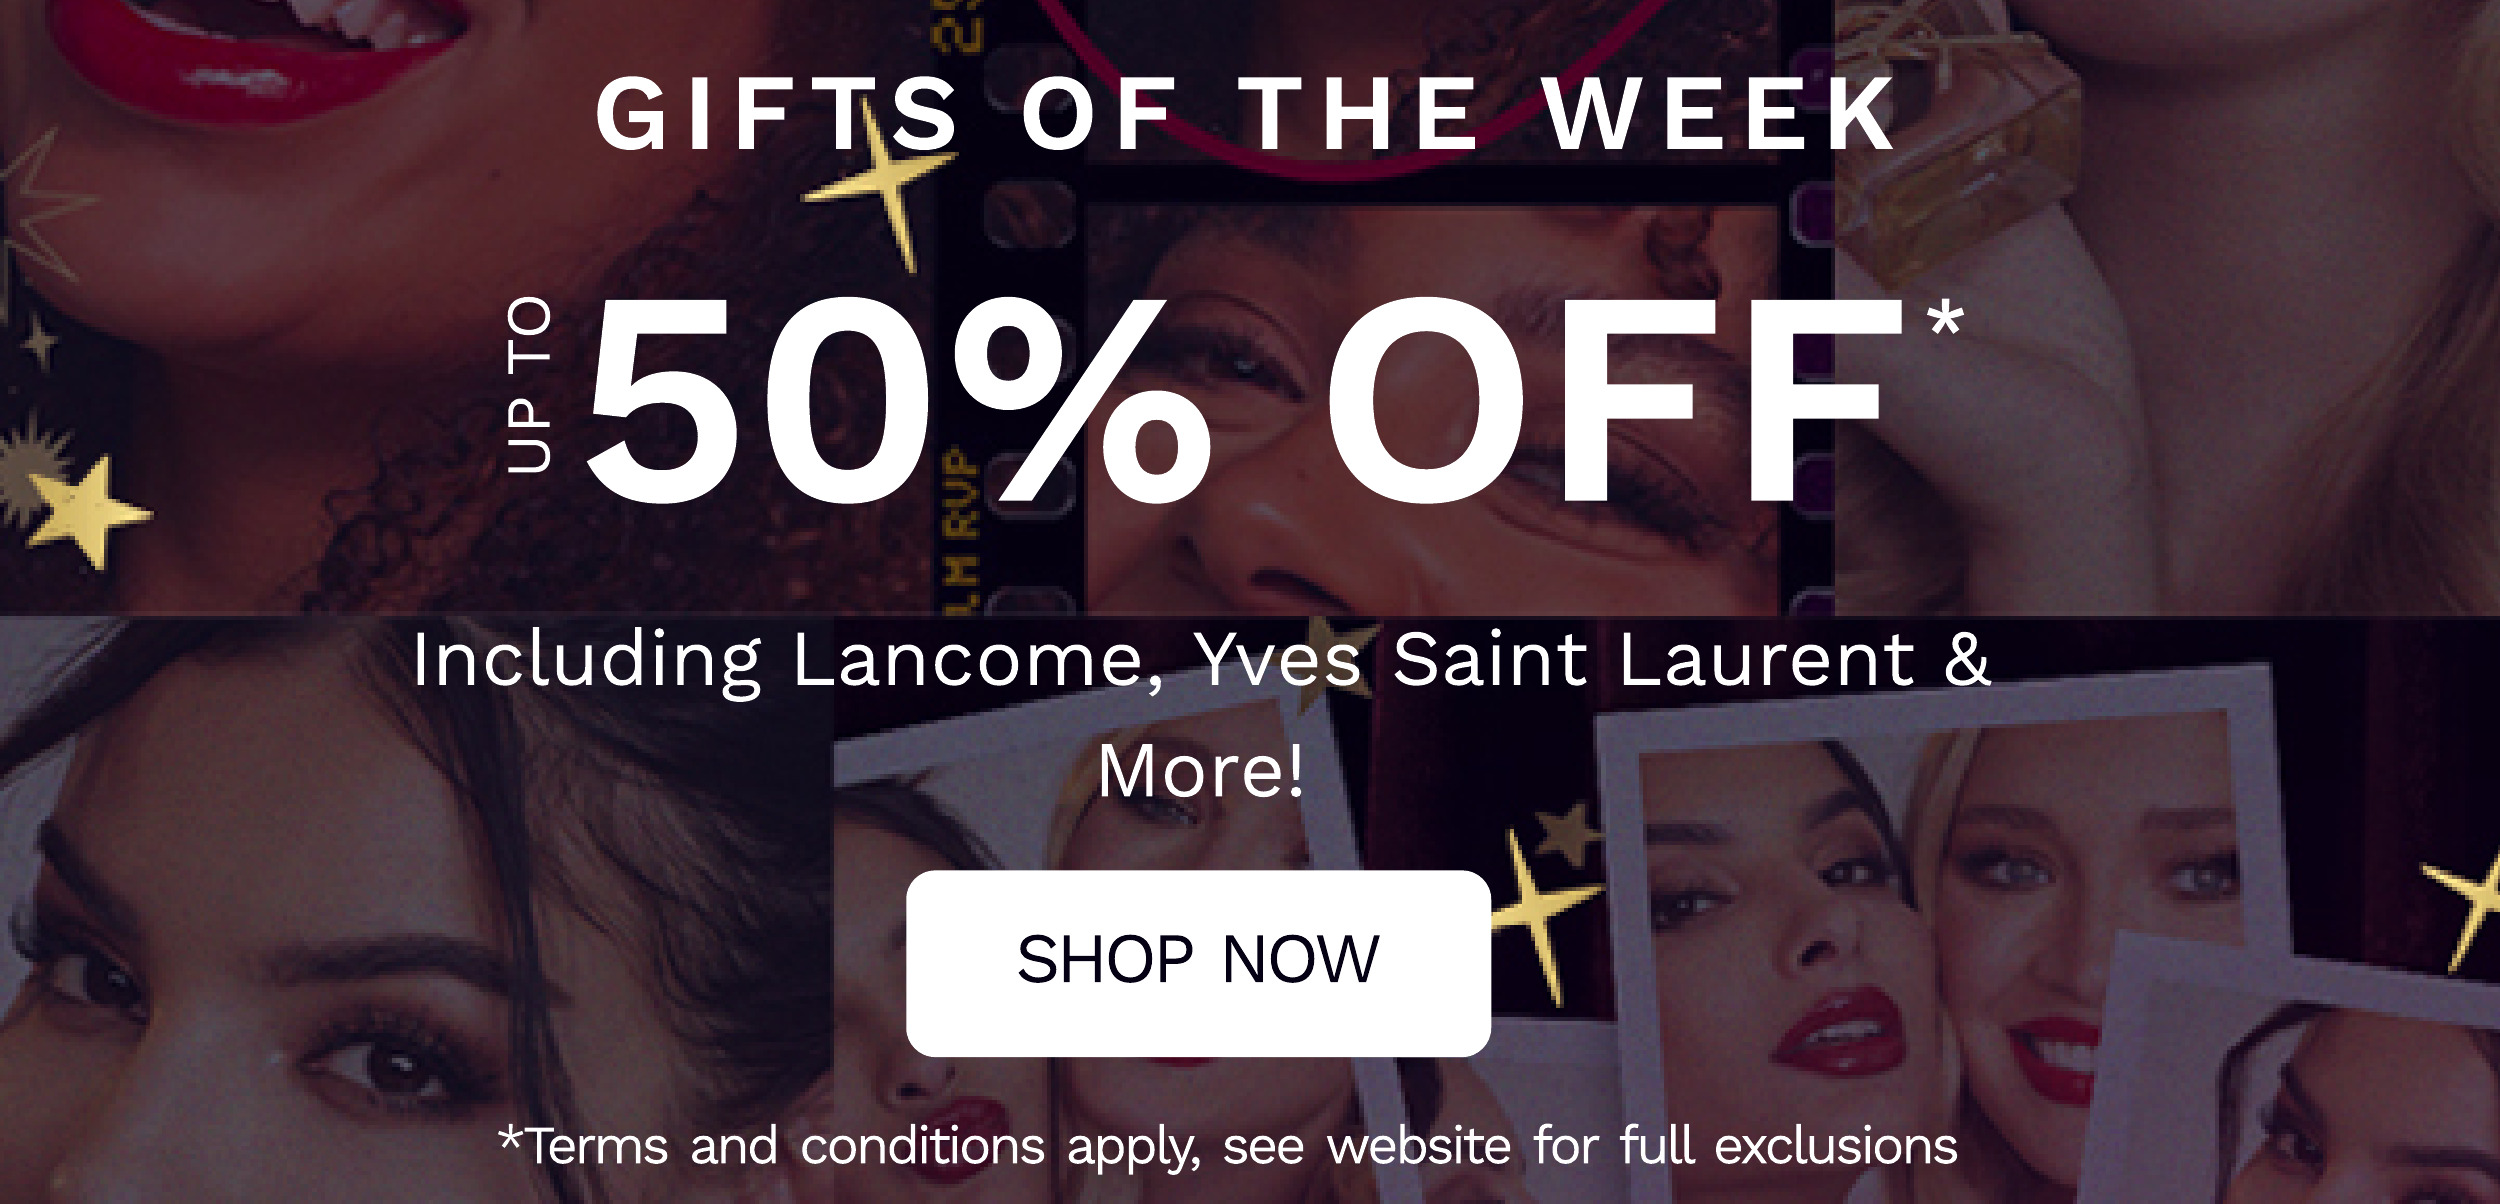 UP TO 50 PERCENT OFF GIFTS OF THE WEEK